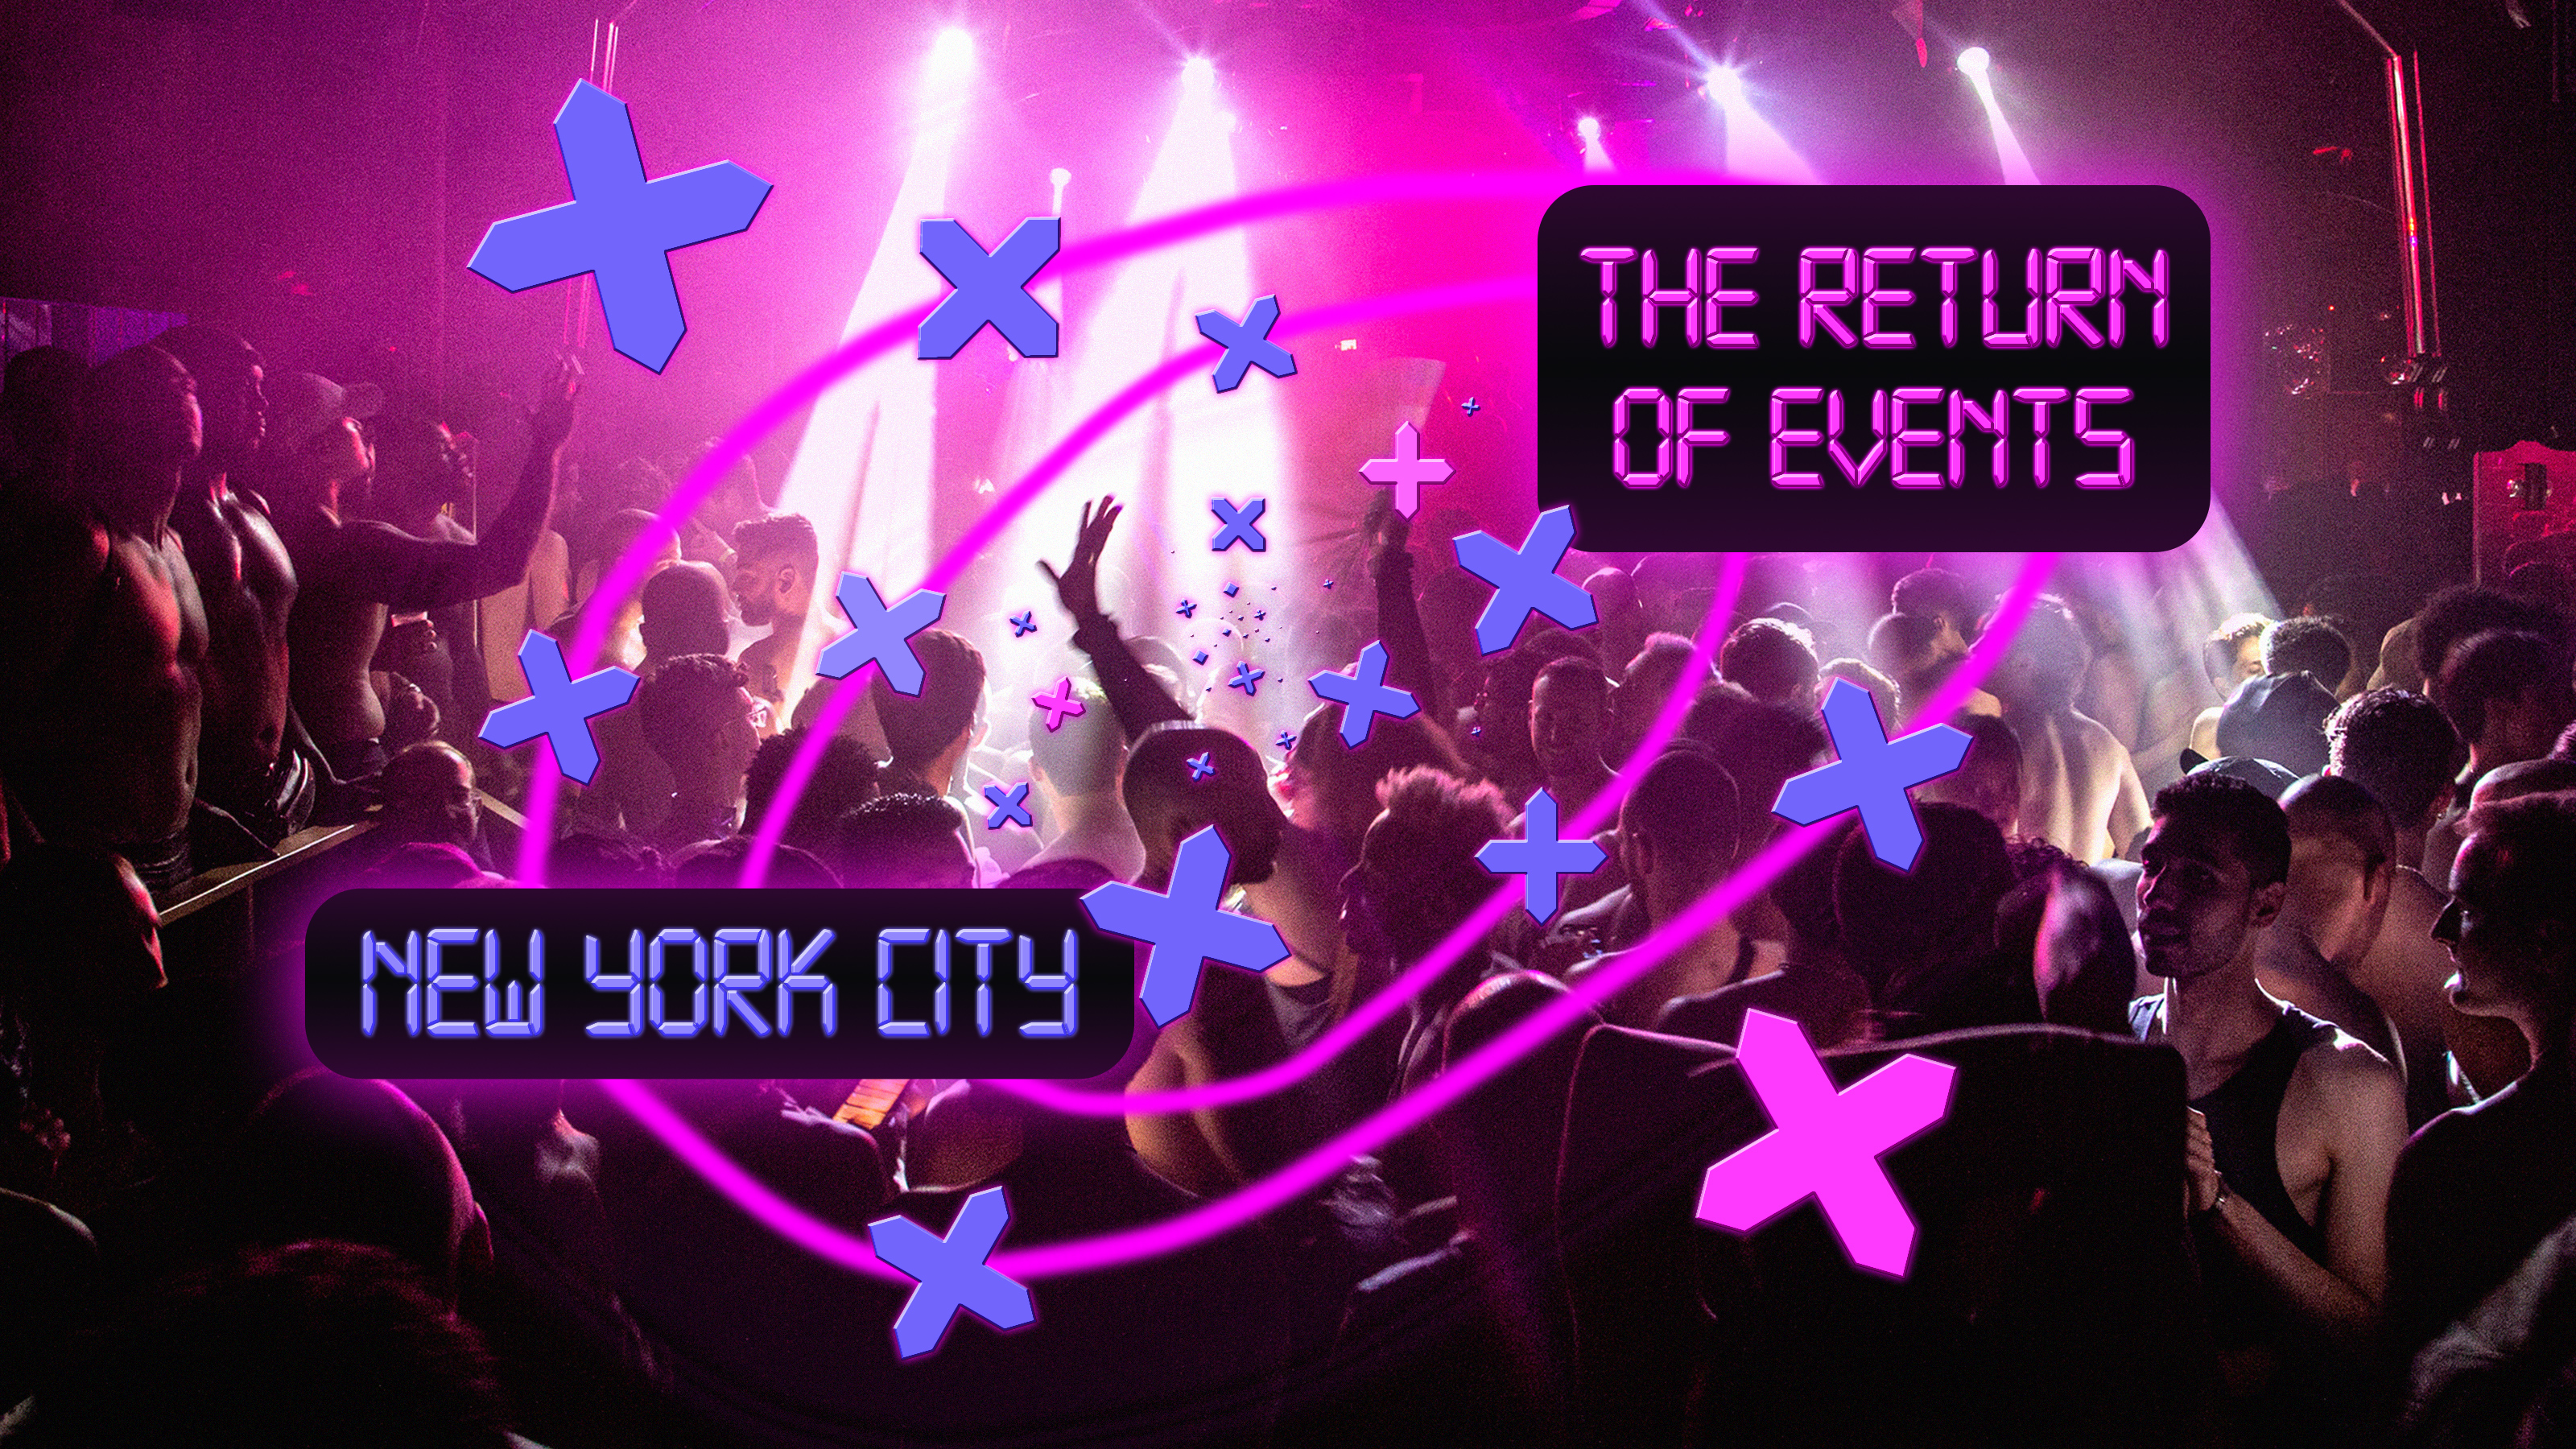 The Return Of Events: New York City